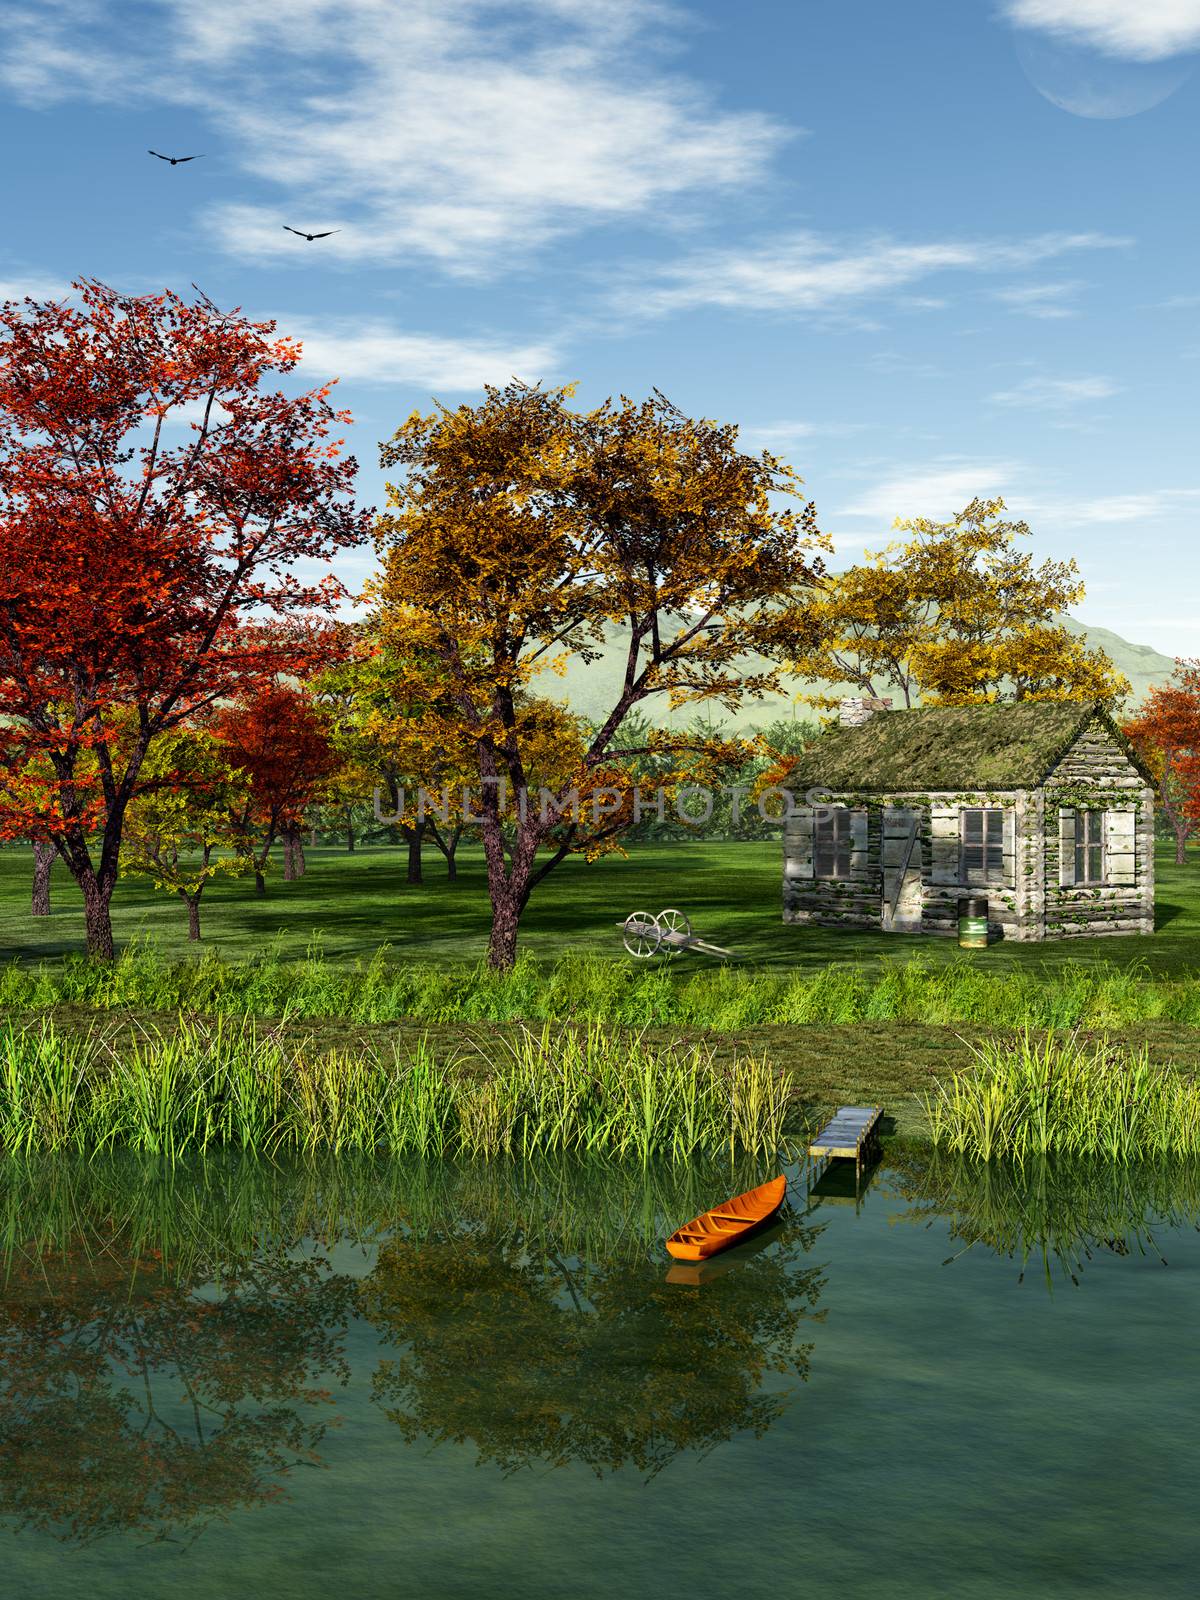 This image shows a idyllic landscape with a cabin in fall